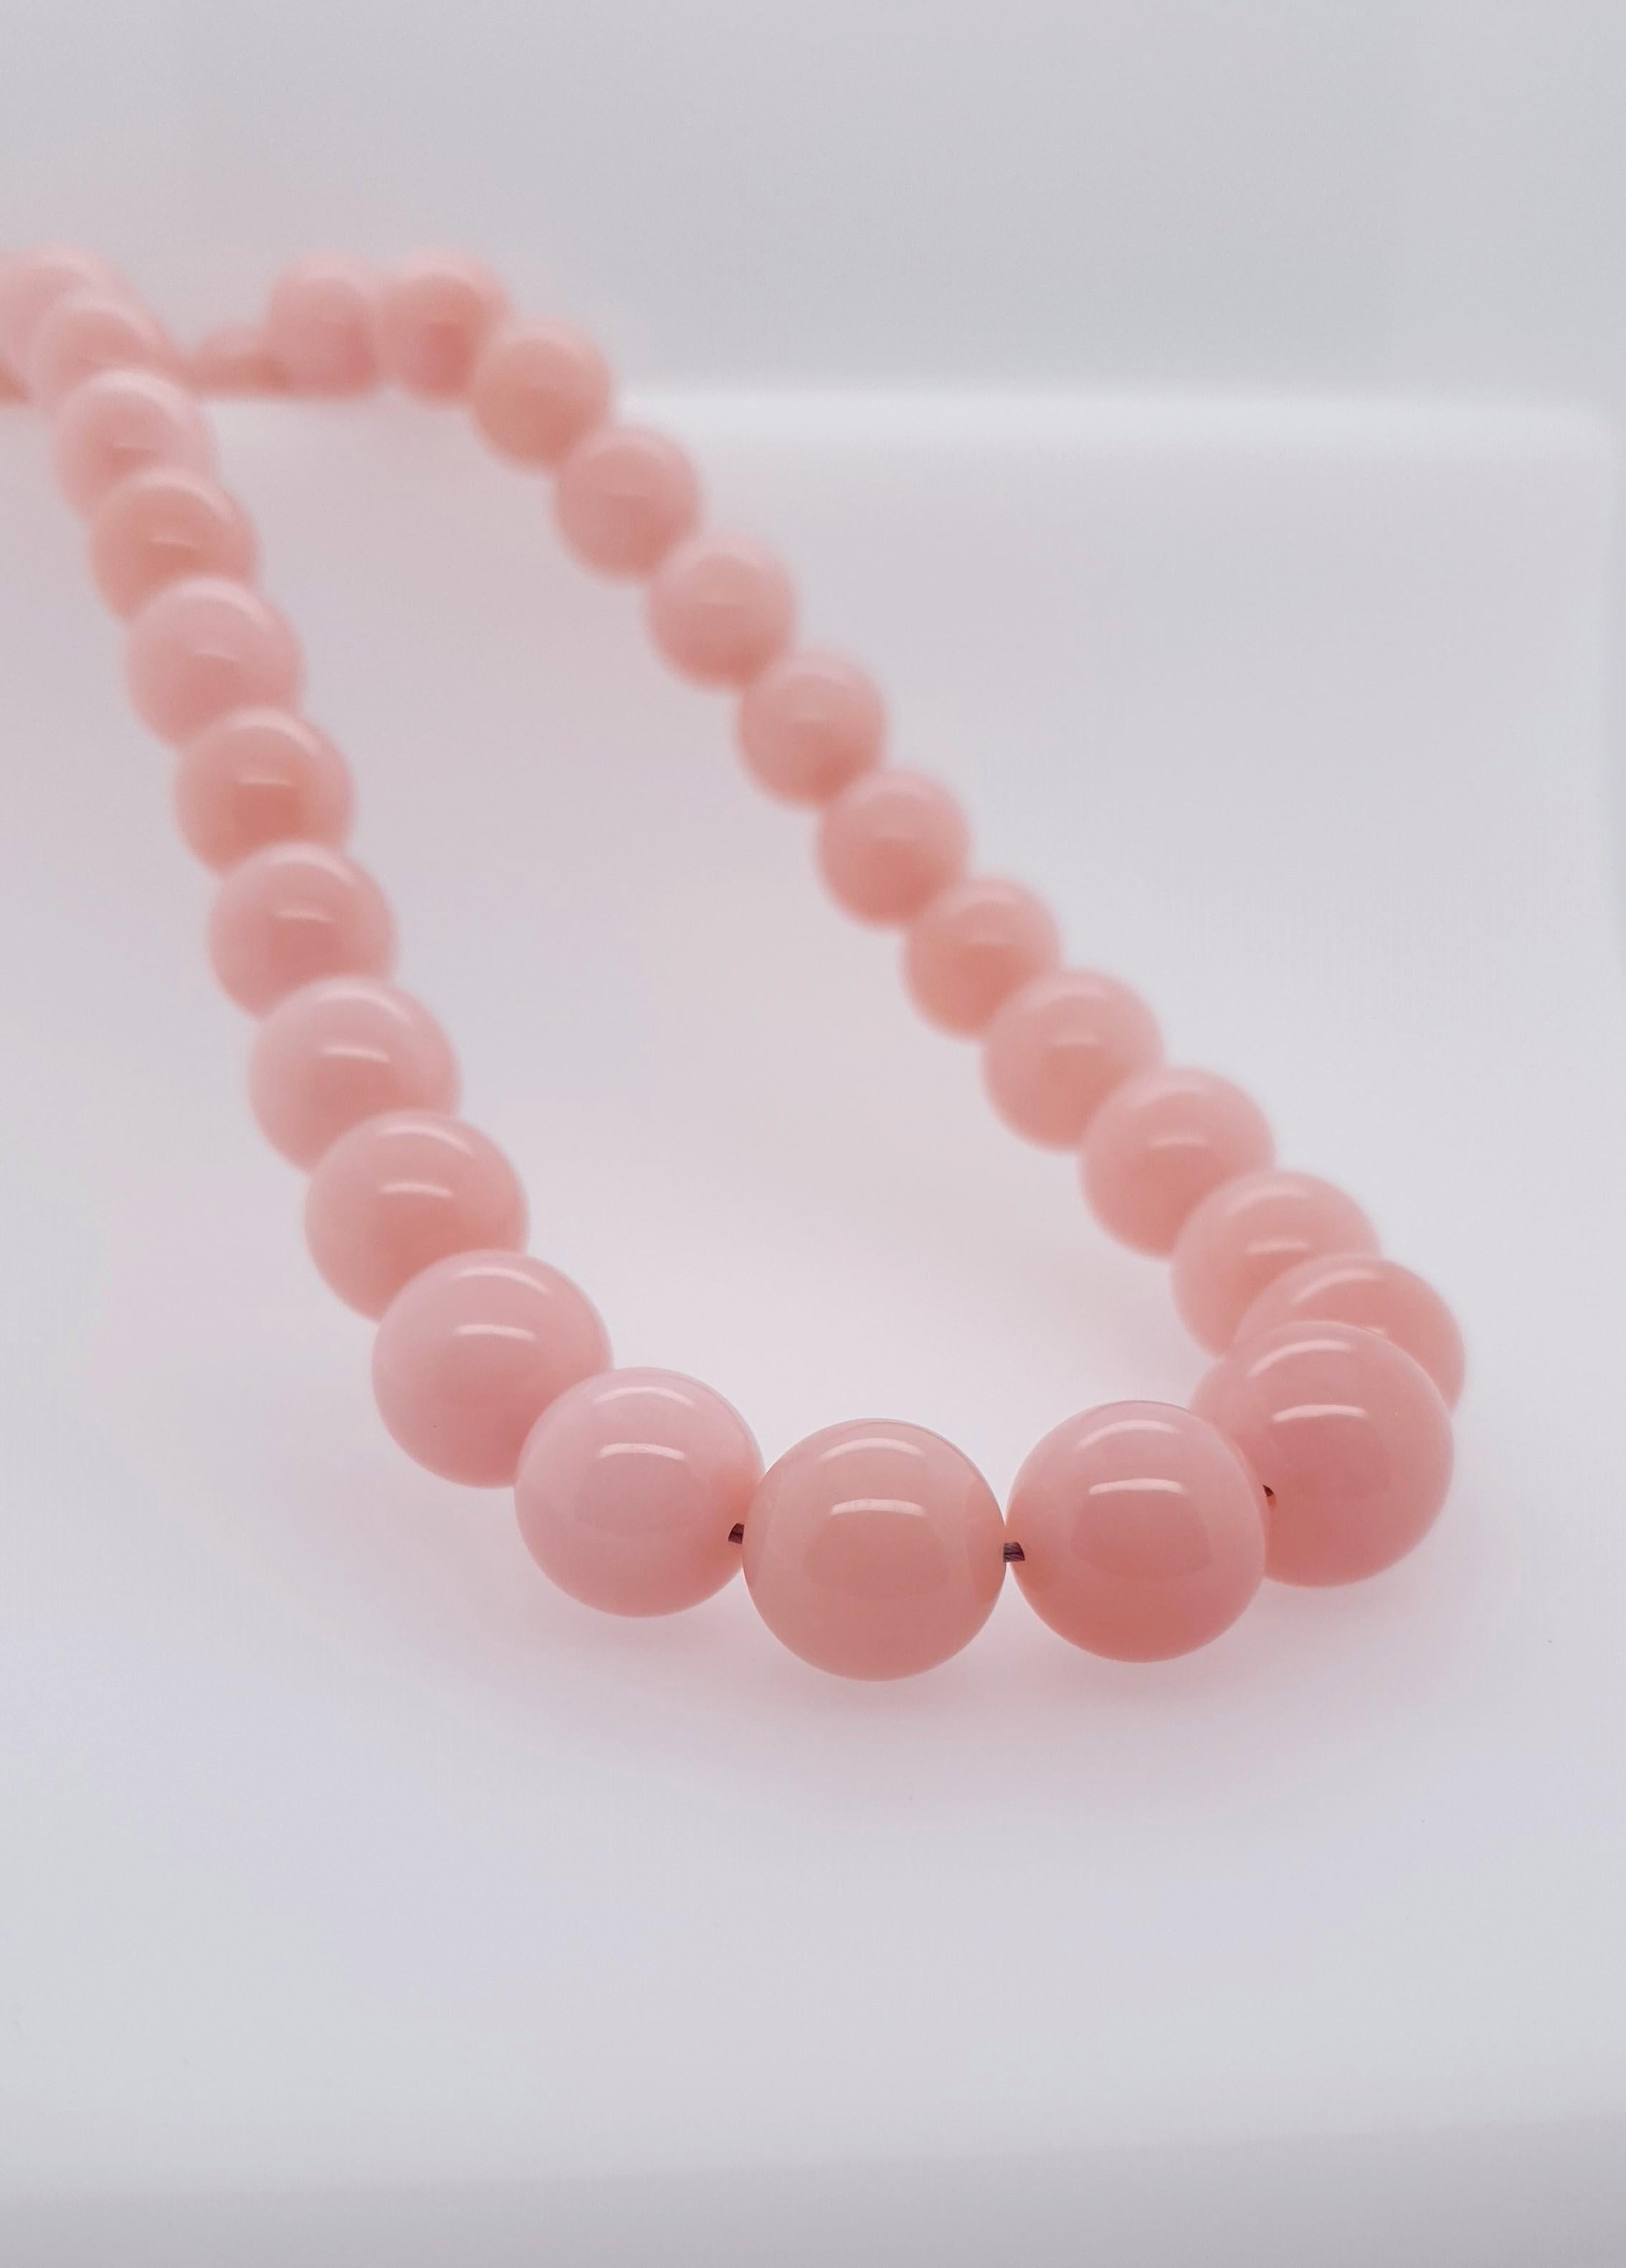 This Natural Pink Opal Beaded Necklace with 18 Carat Rose Gold is totally handmade.
Cutting as well as goldwork are made in German quality. The screw clasp holds the necklace securely around the neck.
Pink Opal in this quality is very rare and